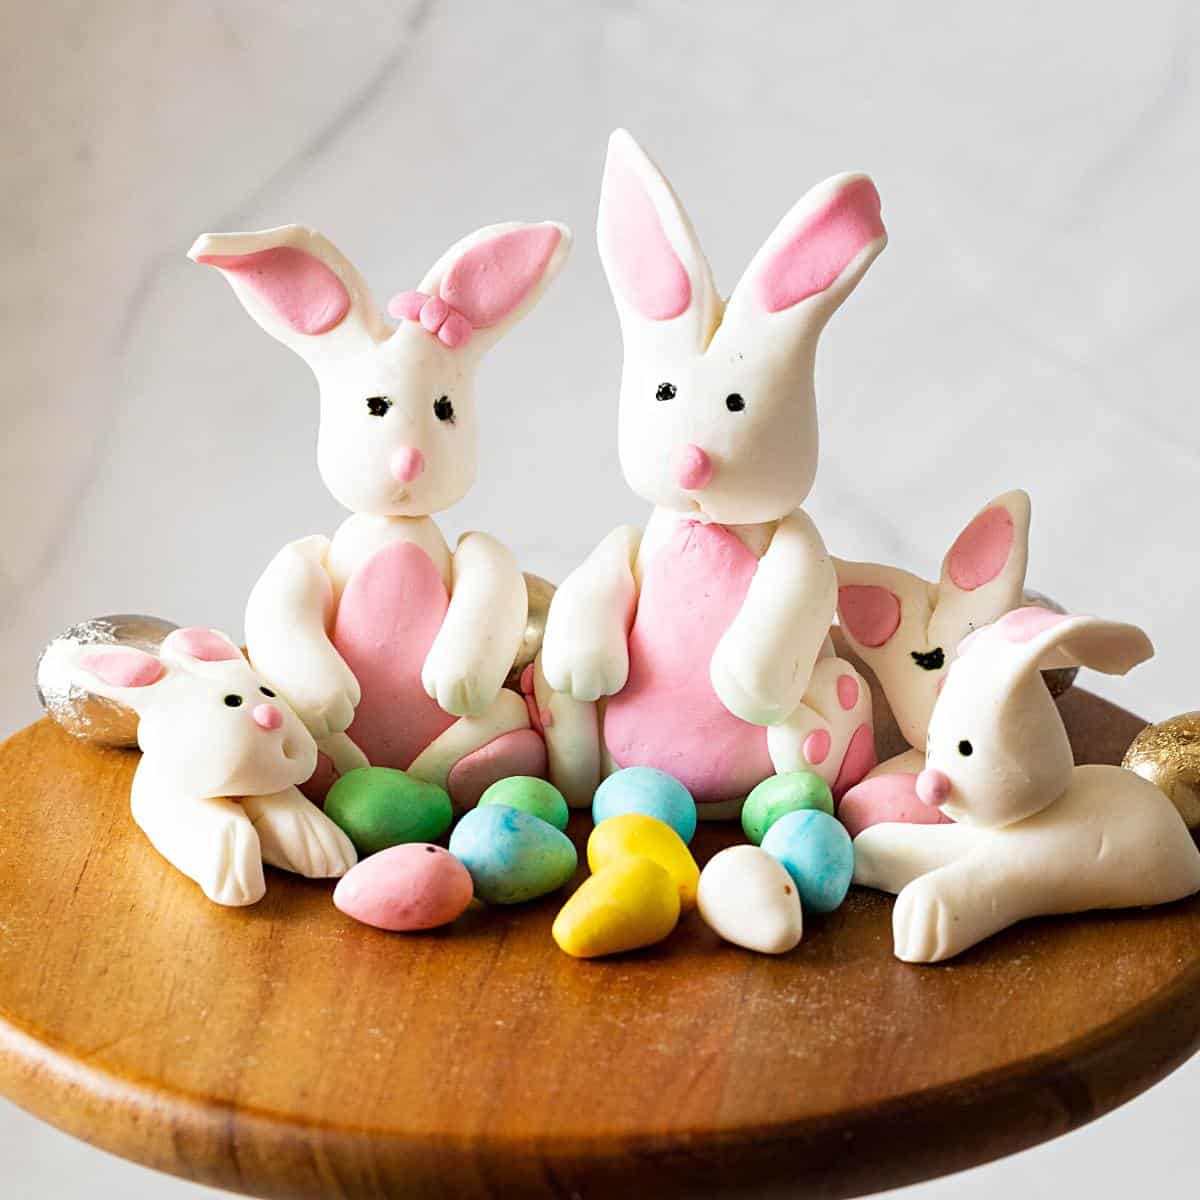 Bunnies with gum paste on the table.